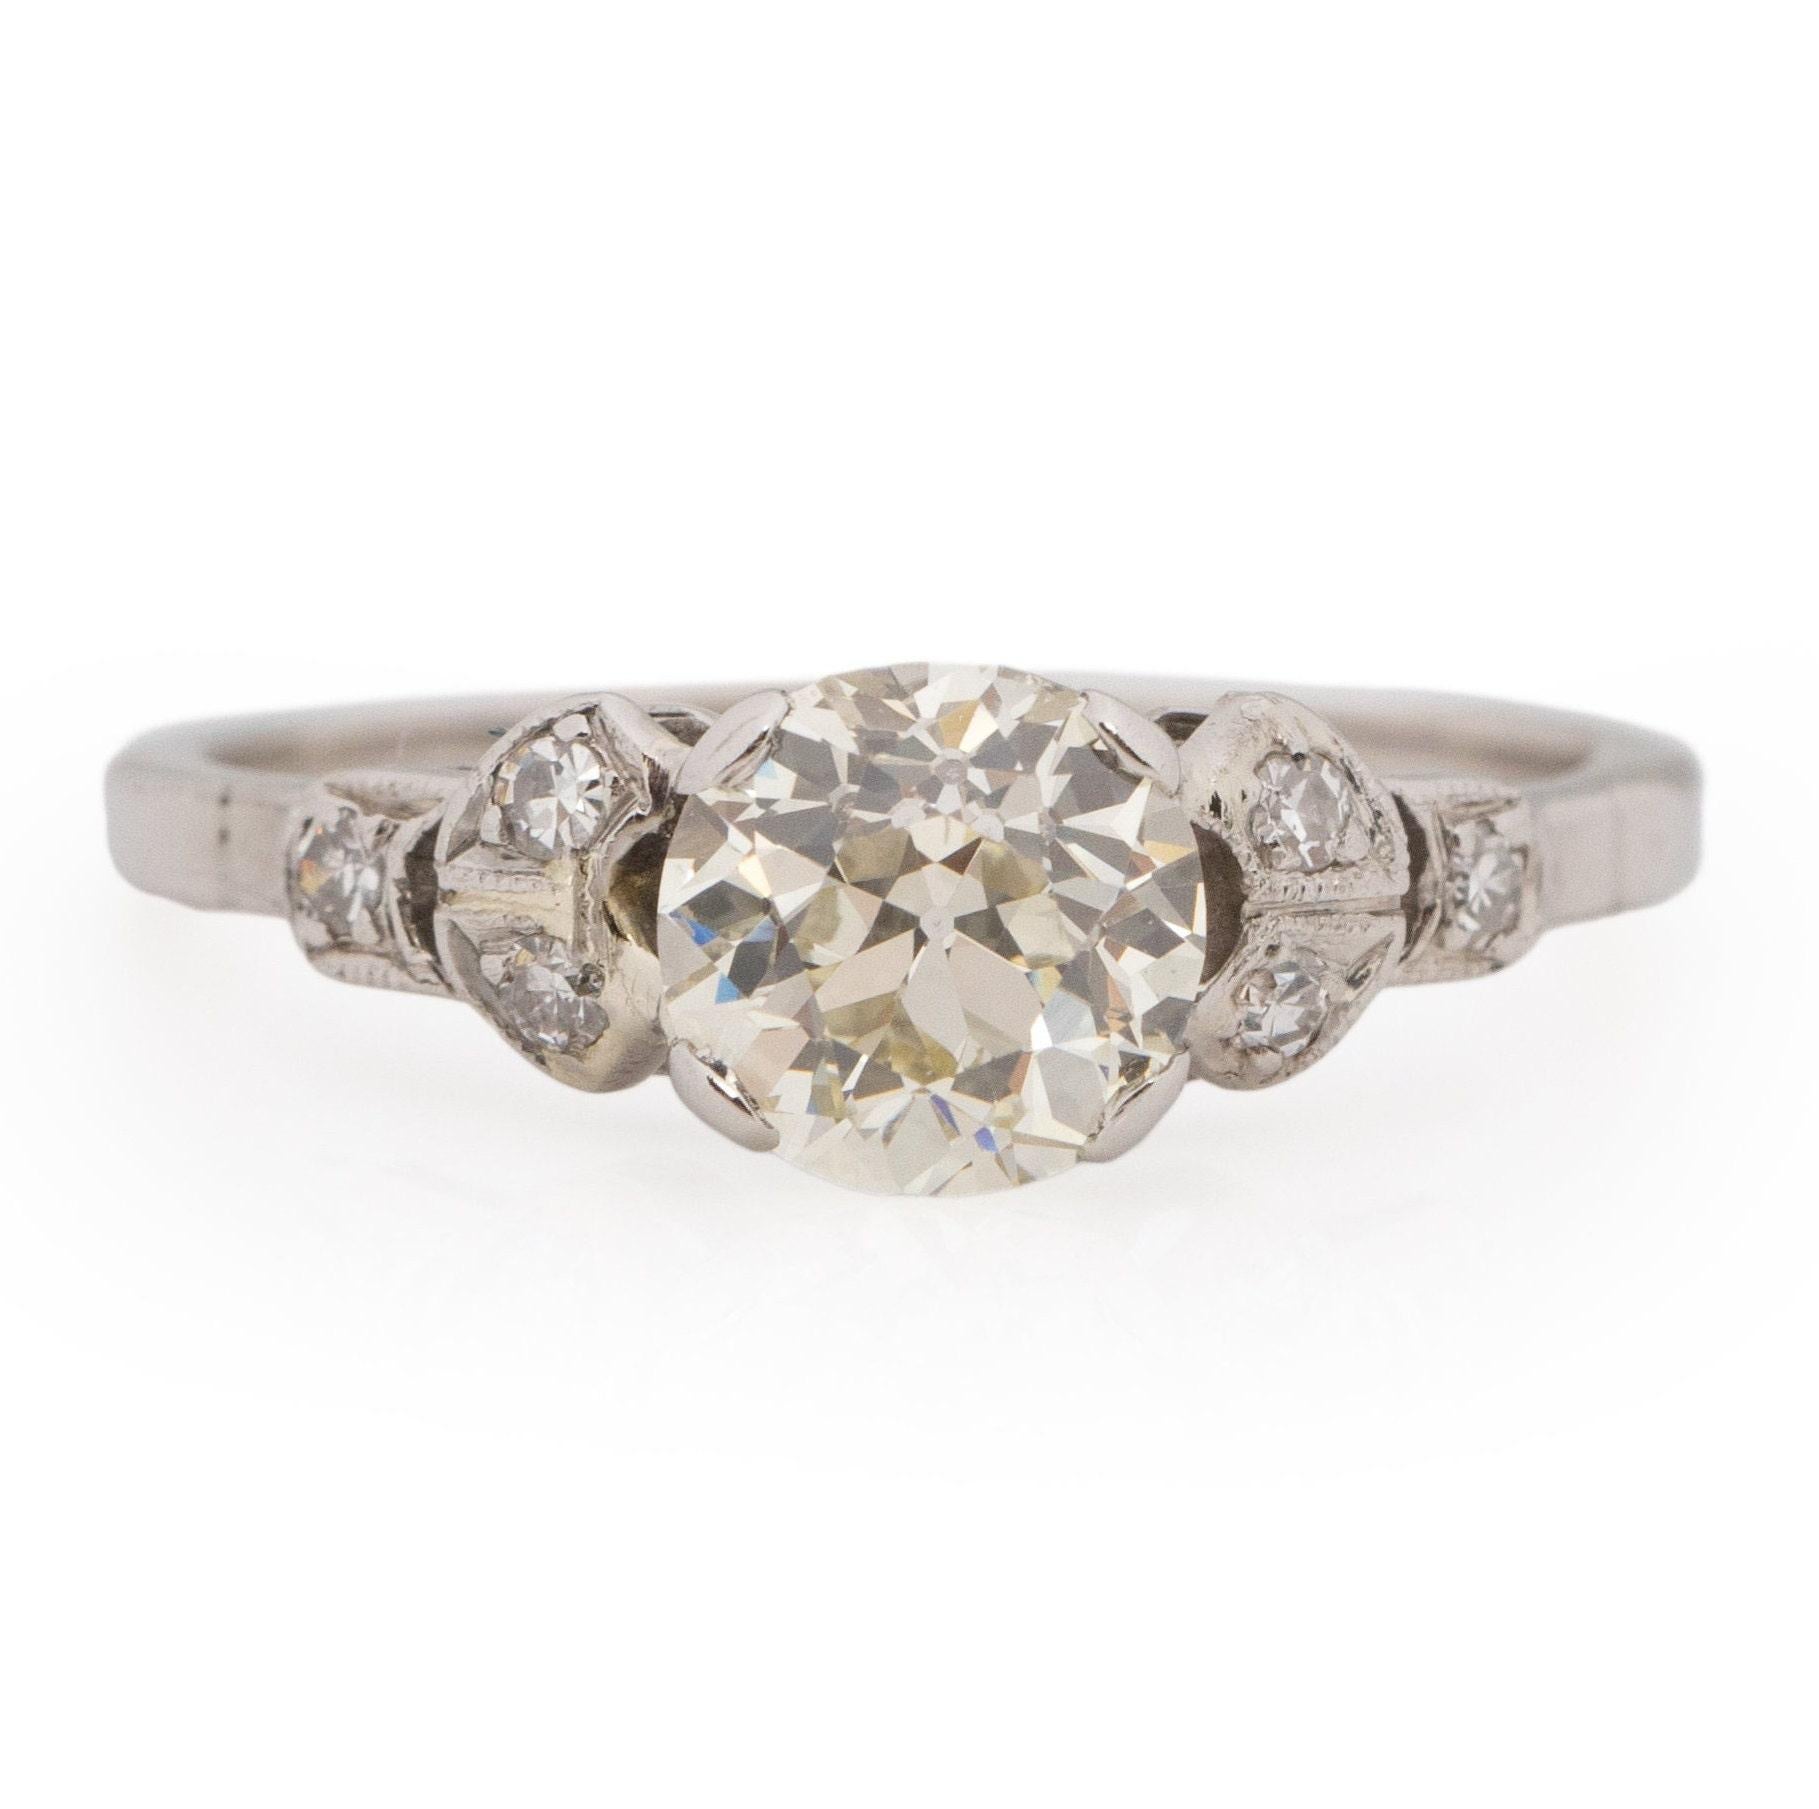 This exquisite art deco gem captures the essence of the vibrant 1920s era. Its style evokes the spirit of a flapper or a character from the Great Gatsby. The ring's elegance is beautifully understated, yet it possesses a dazzling brilliance that can